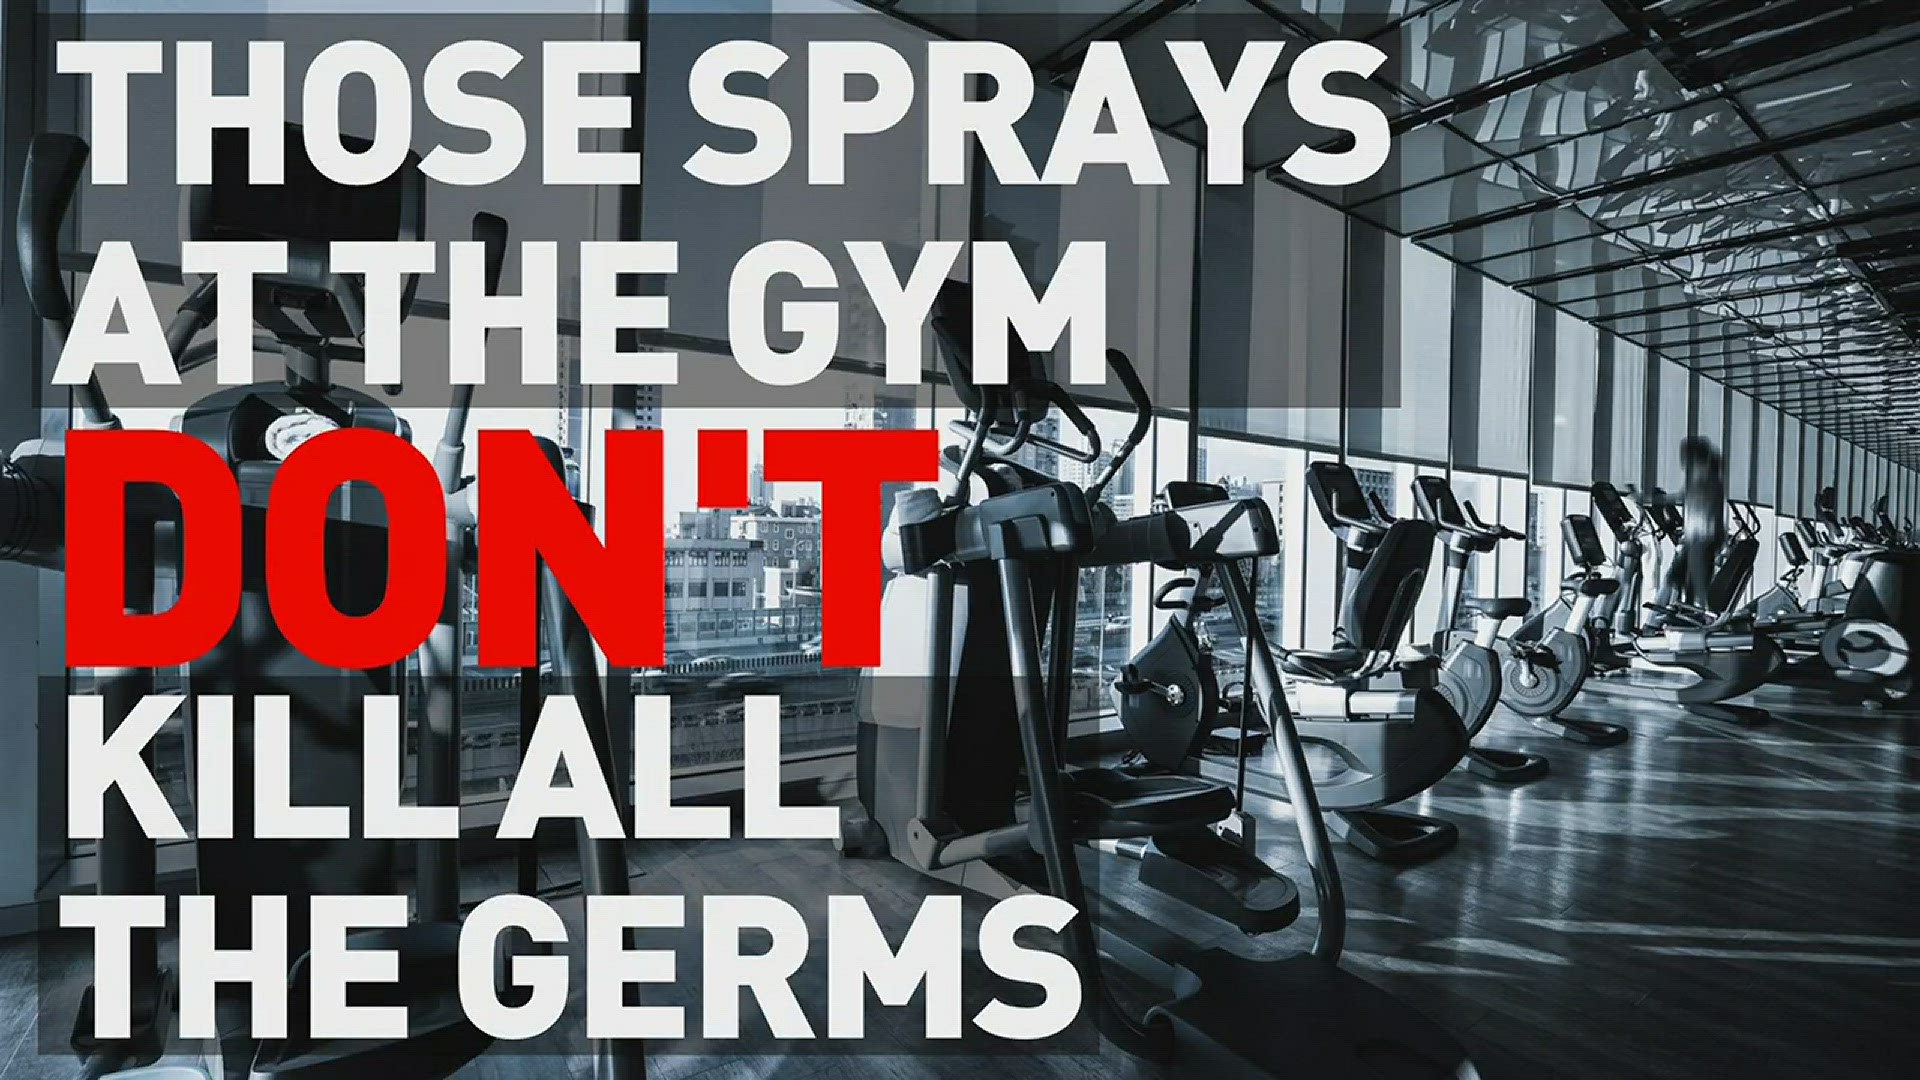 The cleaners at the gym don't kill all germs, like norovirus.